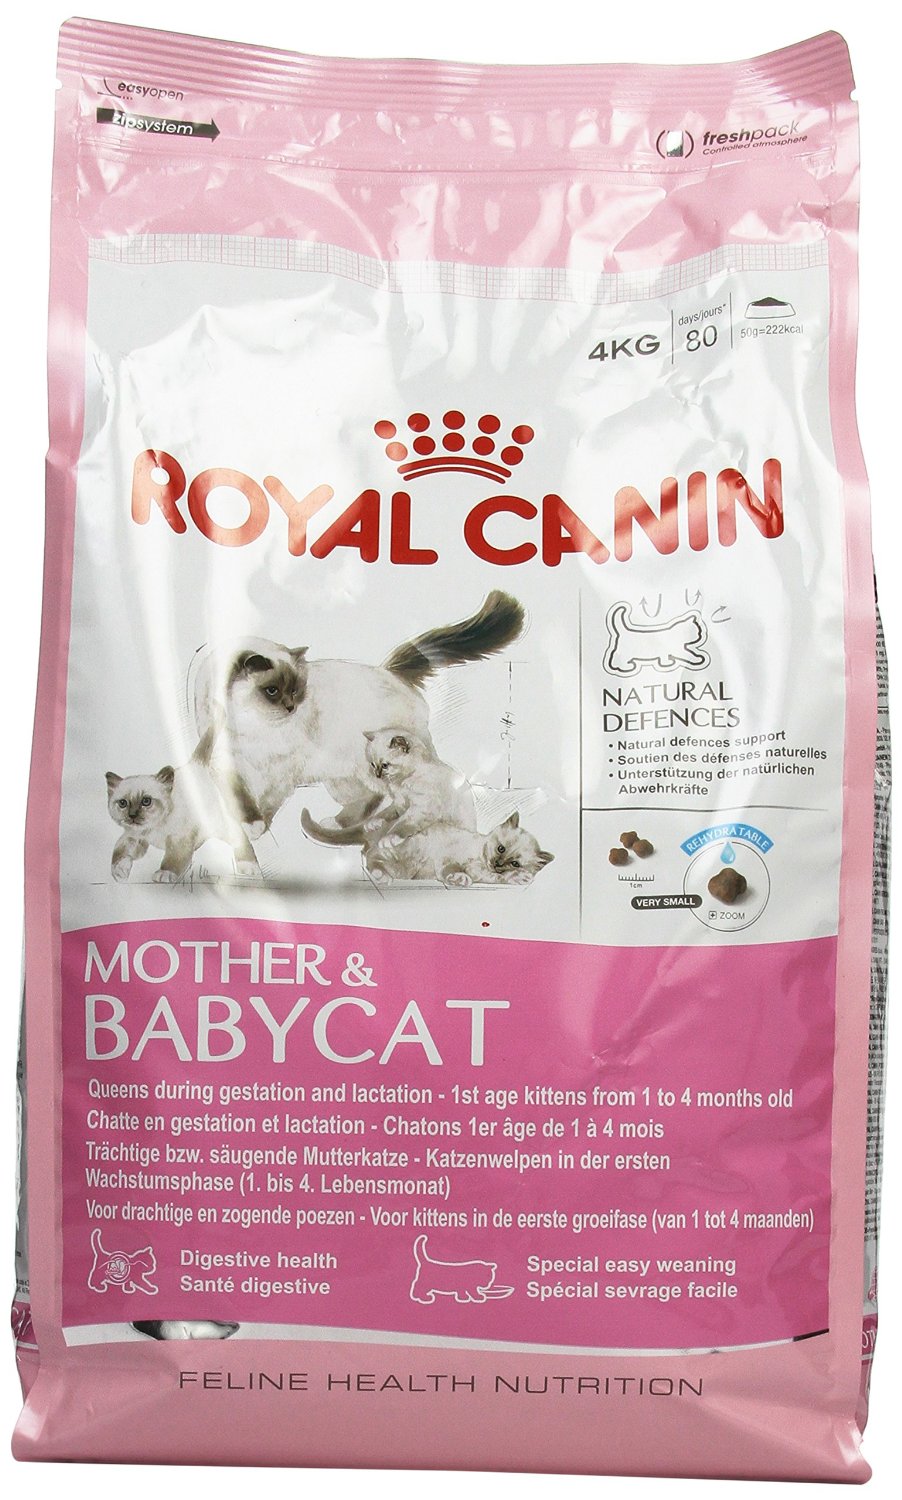 Royal Canin Babycat Dry Food (Unopened)